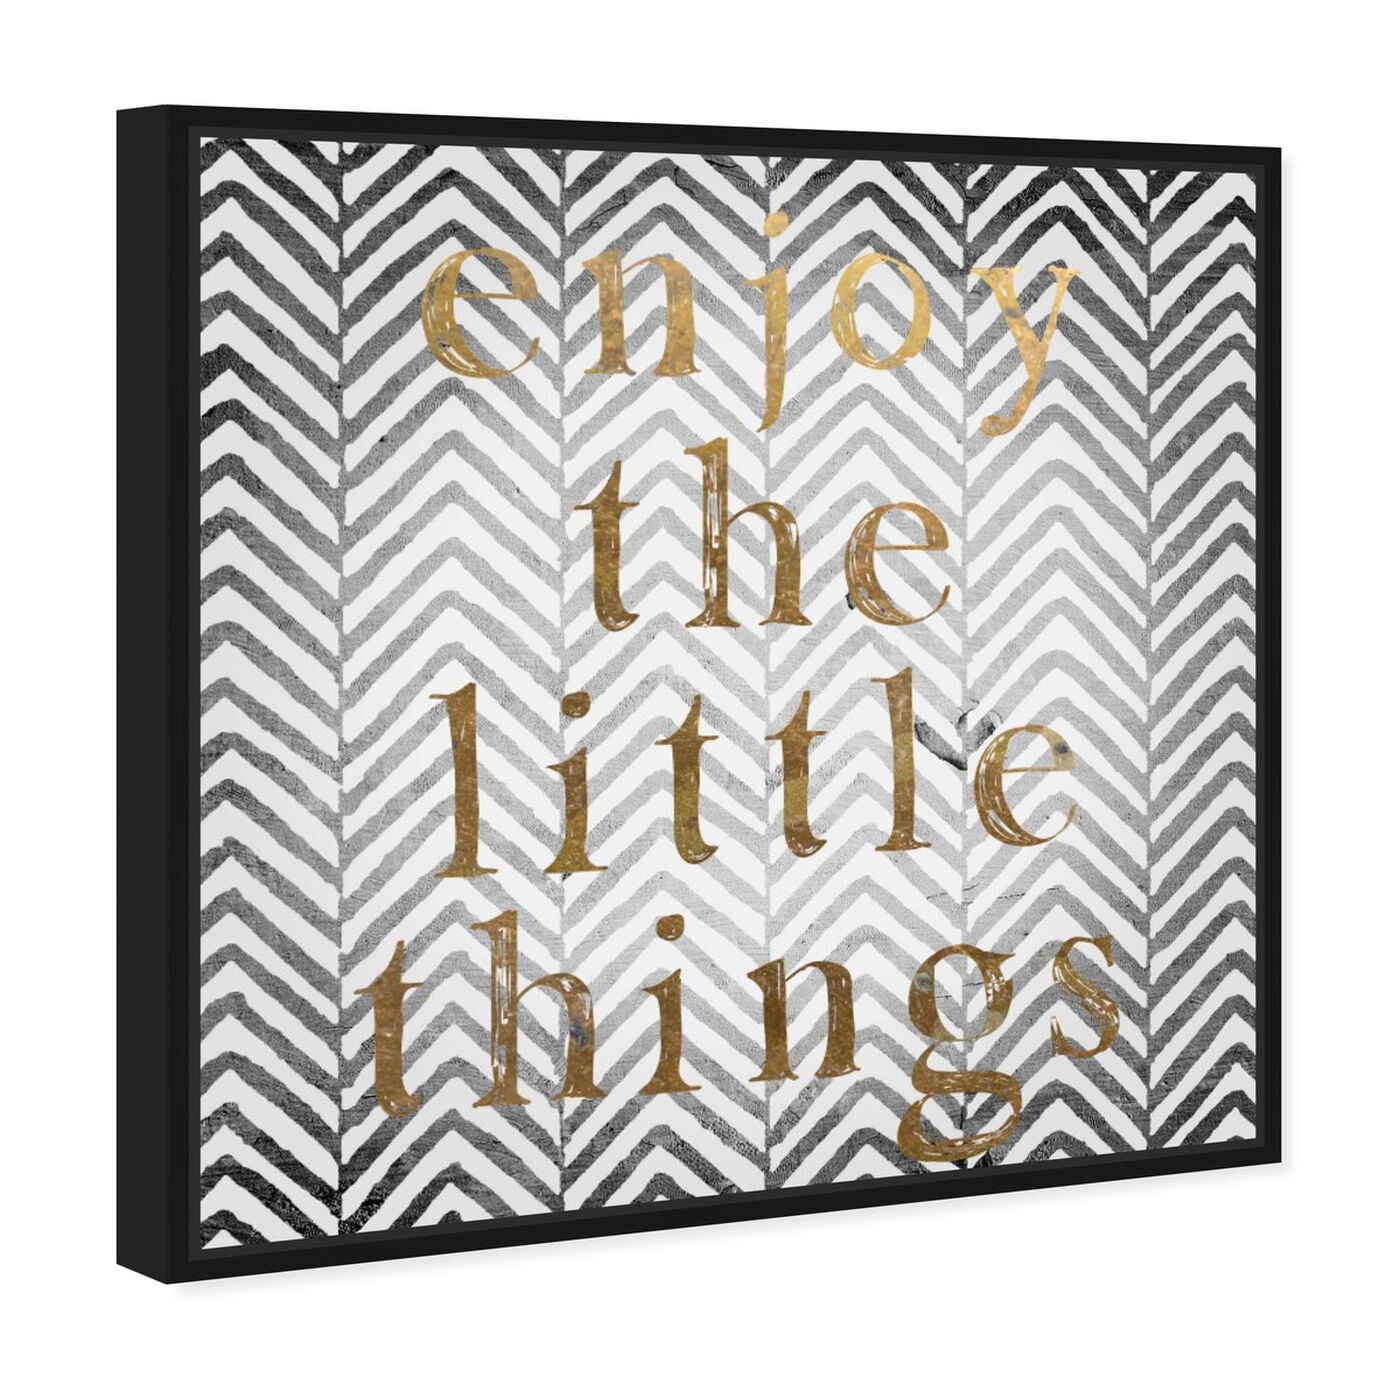 Angled view of Enjoy The Little Things featuring typography and quotes and inspirational quotes and sayings art.